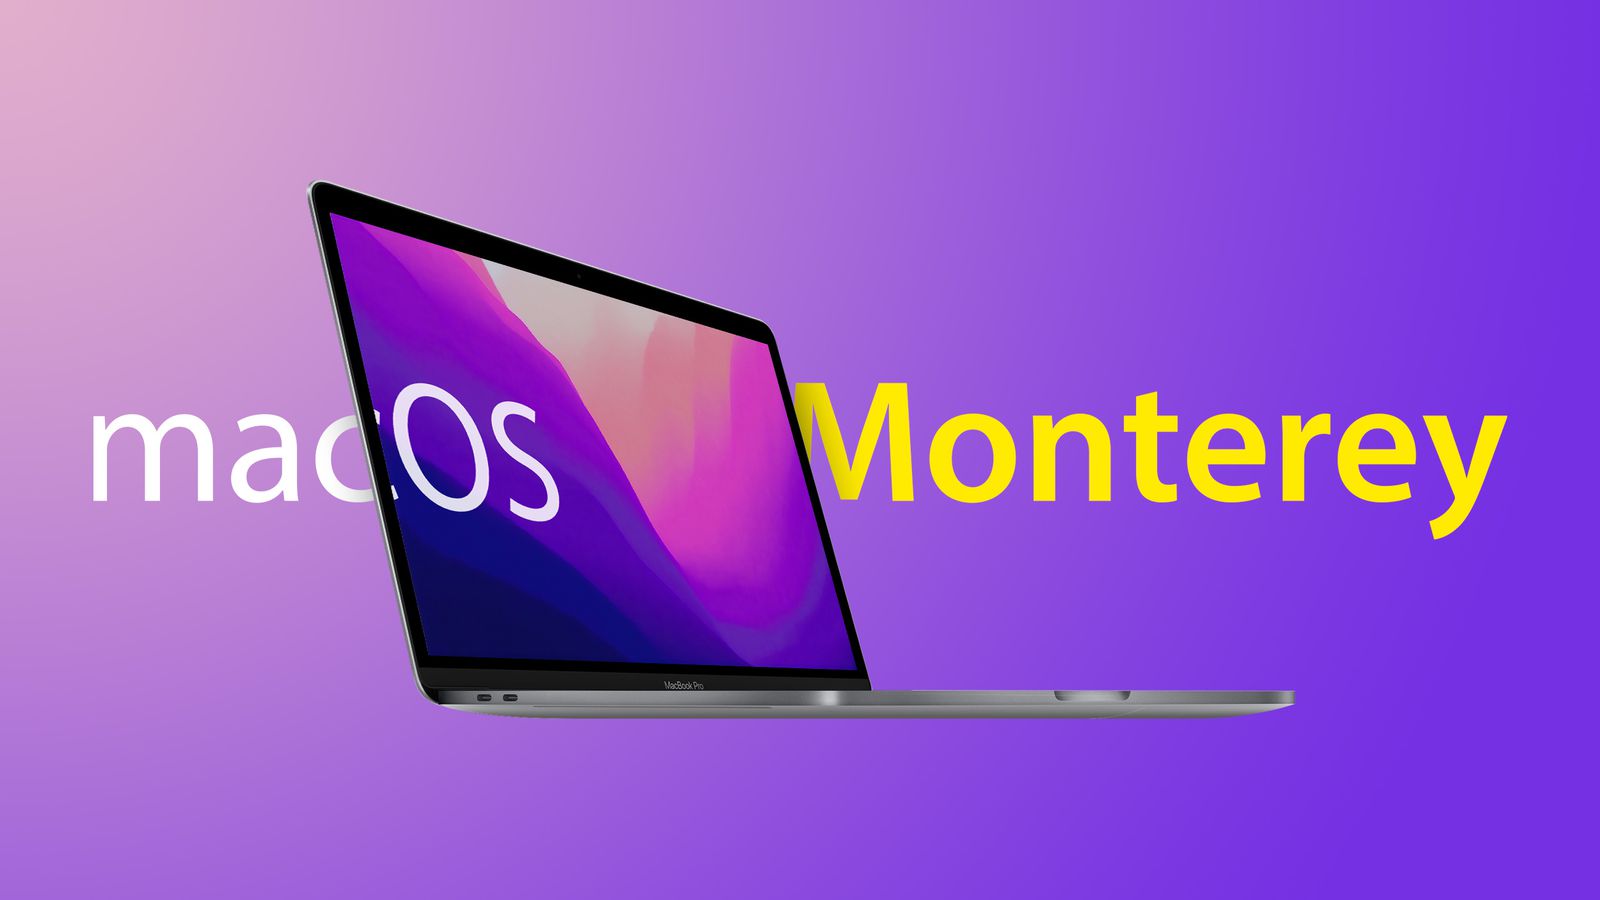 macOS Monterey: All the Features Detailed